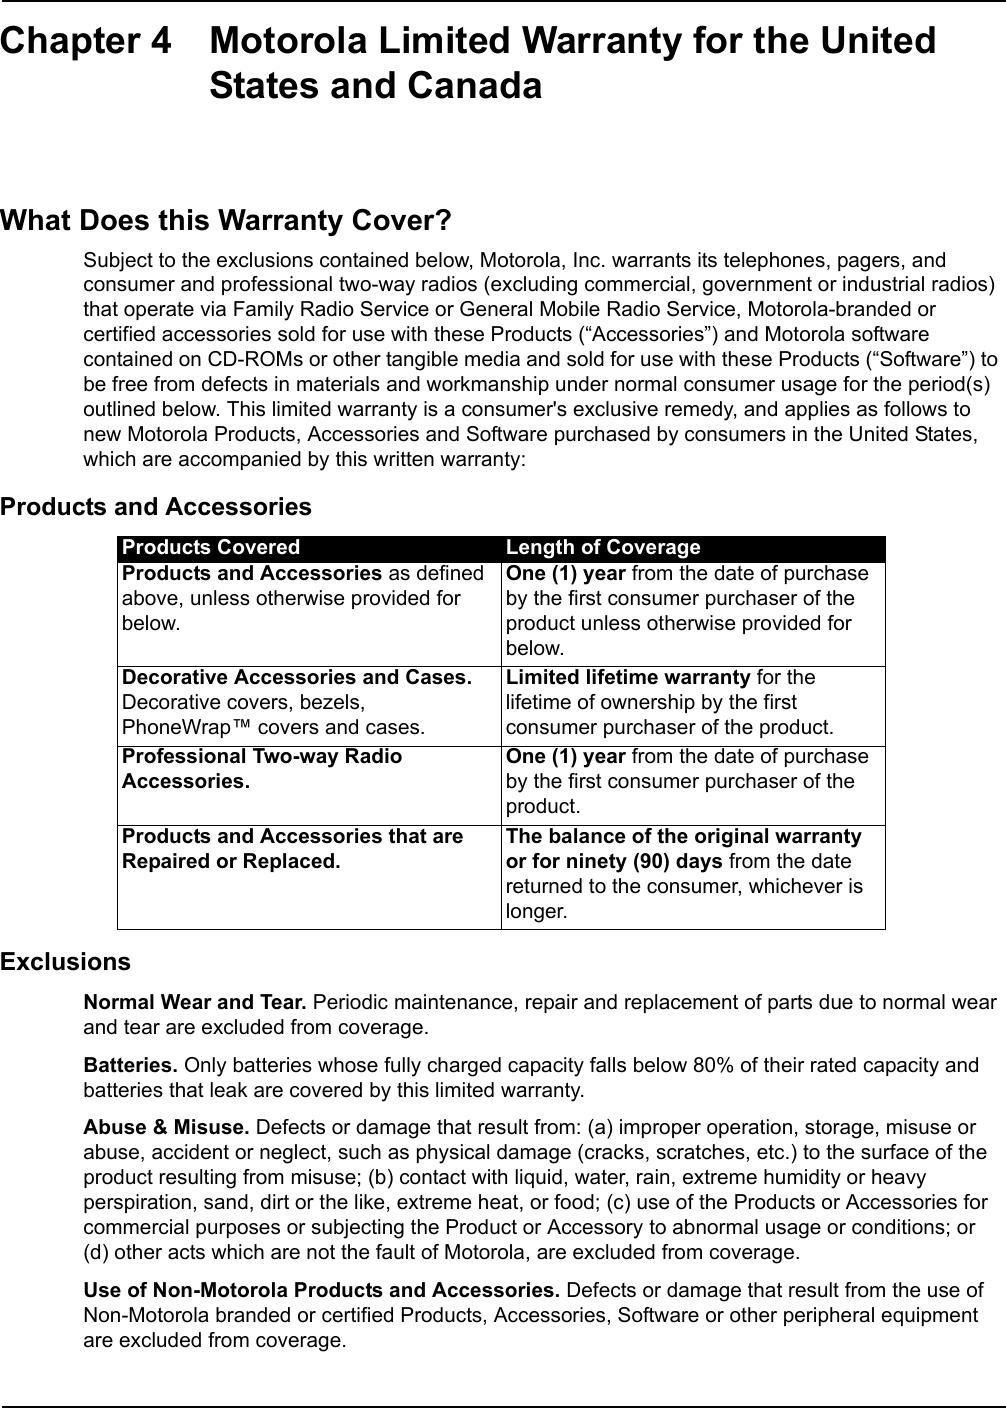 Chapter 4 Motorola Limited Warranty for the United States and CanadaWhat Does this Warranty Cover?Subject to the exclusions contained below, Motorola, Inc. warrants its telephones, pagers, and consumer and professional two-way radios (excluding commercial, government or industrial radios) that operate via Family Radio Service or General Mobile Radio Service, Motorola-branded or certified accessories sold for use with these Products (“Accessories”) and Motorola software contained on CD-ROMs or other tangible media and sold for use with these Products (“Software”) to be free from defects in materials and workmanship under normal consumer usage for the period(s) outlined below. This limited warranty is a consumer&apos;s exclusive remedy, and applies as follows to new Motorola Products, Accessories and Software purchased by consumers in the United States, which are accompanied by this written warranty:Products and AccessoriesExclusionsNormal Wear and Tear. Periodic maintenance, repair and replacement of parts due to normal wear and tear are excluded from coverage.Batteries. Only batteries whose fully charged capacity falls below 80% of their rated capacity and batteries that leak are covered by this limited warranty.Abuse &amp; Misuse. Defects or damage that result from: (a) improper operation, storage, misuse or abuse, accident or neglect, such as physical damage (cracks, scratches, etc.) to the surface of the product resulting from misuse; (b) contact with liquid, water, rain, extreme humidity or heavy perspiration, sand, dirt or the like, extreme heat, or food; (c) use of the Products or Accessories for commercial purposes or subjecting the Product or Accessory to abnormal usage or conditions; or (d) other acts which are not the fault of Motorola, are excluded from coverage.Use of Non-Motorola Products and Accessories. Defects or damage that result from the use of Non-Motorola branded or certified Products, Accessories, Software or other peripheral equipment are excluded from coverage.Products Covered Length of CoverageProducts and Accessories as defined above, unless otherwise provided for below.One (1) year from the date of purchase by the first consumer purchaser of the product unless otherwise provided for below.Decorative Accessories and Cases. Decorative covers, bezels, PhoneWrap™ covers and cases.Limited lifetime warranty for the lifetime of ownership by the first consumer purchaser of the product.Professional Two-way Radio Accessories.One (1) year from the date of purchase by the first consumer purchaser of the product.Products and Accessories that are Repaired or Replaced.The balance of the original warranty or for ninety (90) days from the date returned to the consumer, whichever is longer.